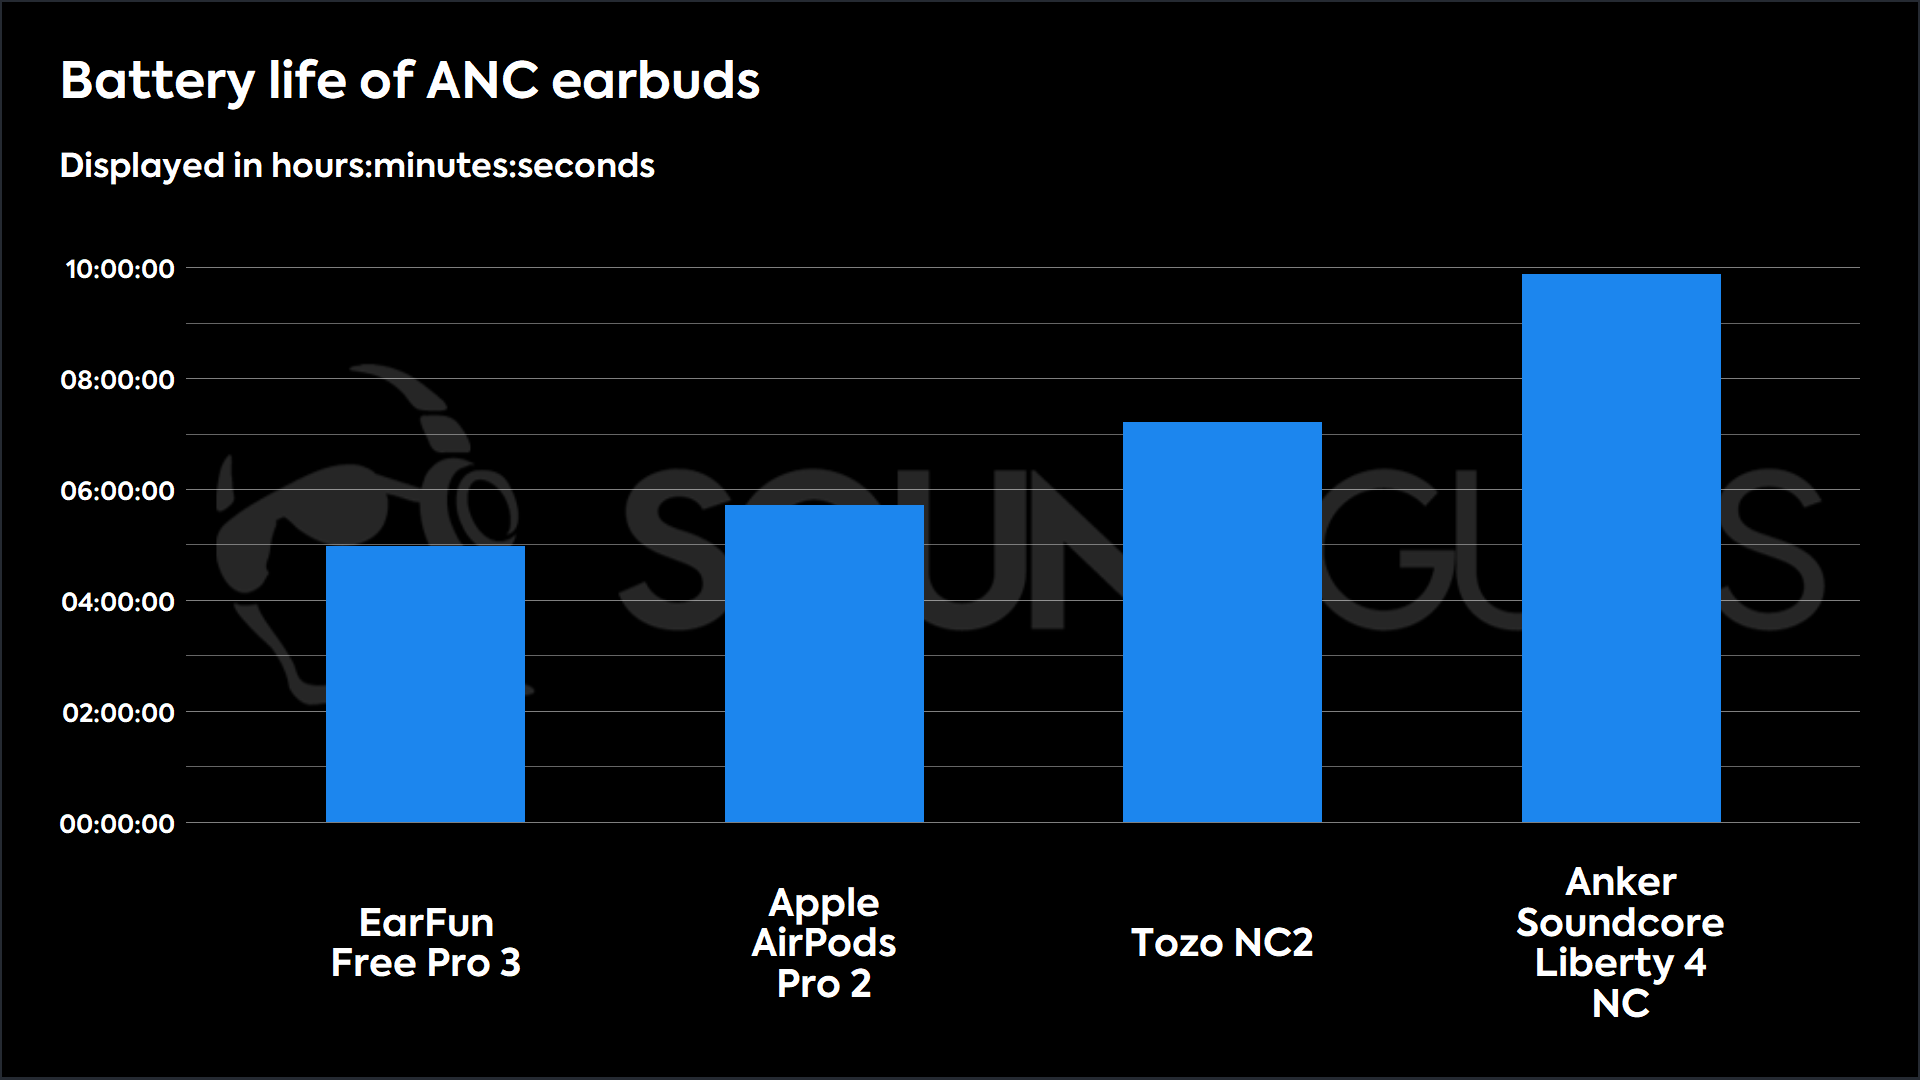 A bar plot showing the battery life durations for several competing models of ANC earbuds.